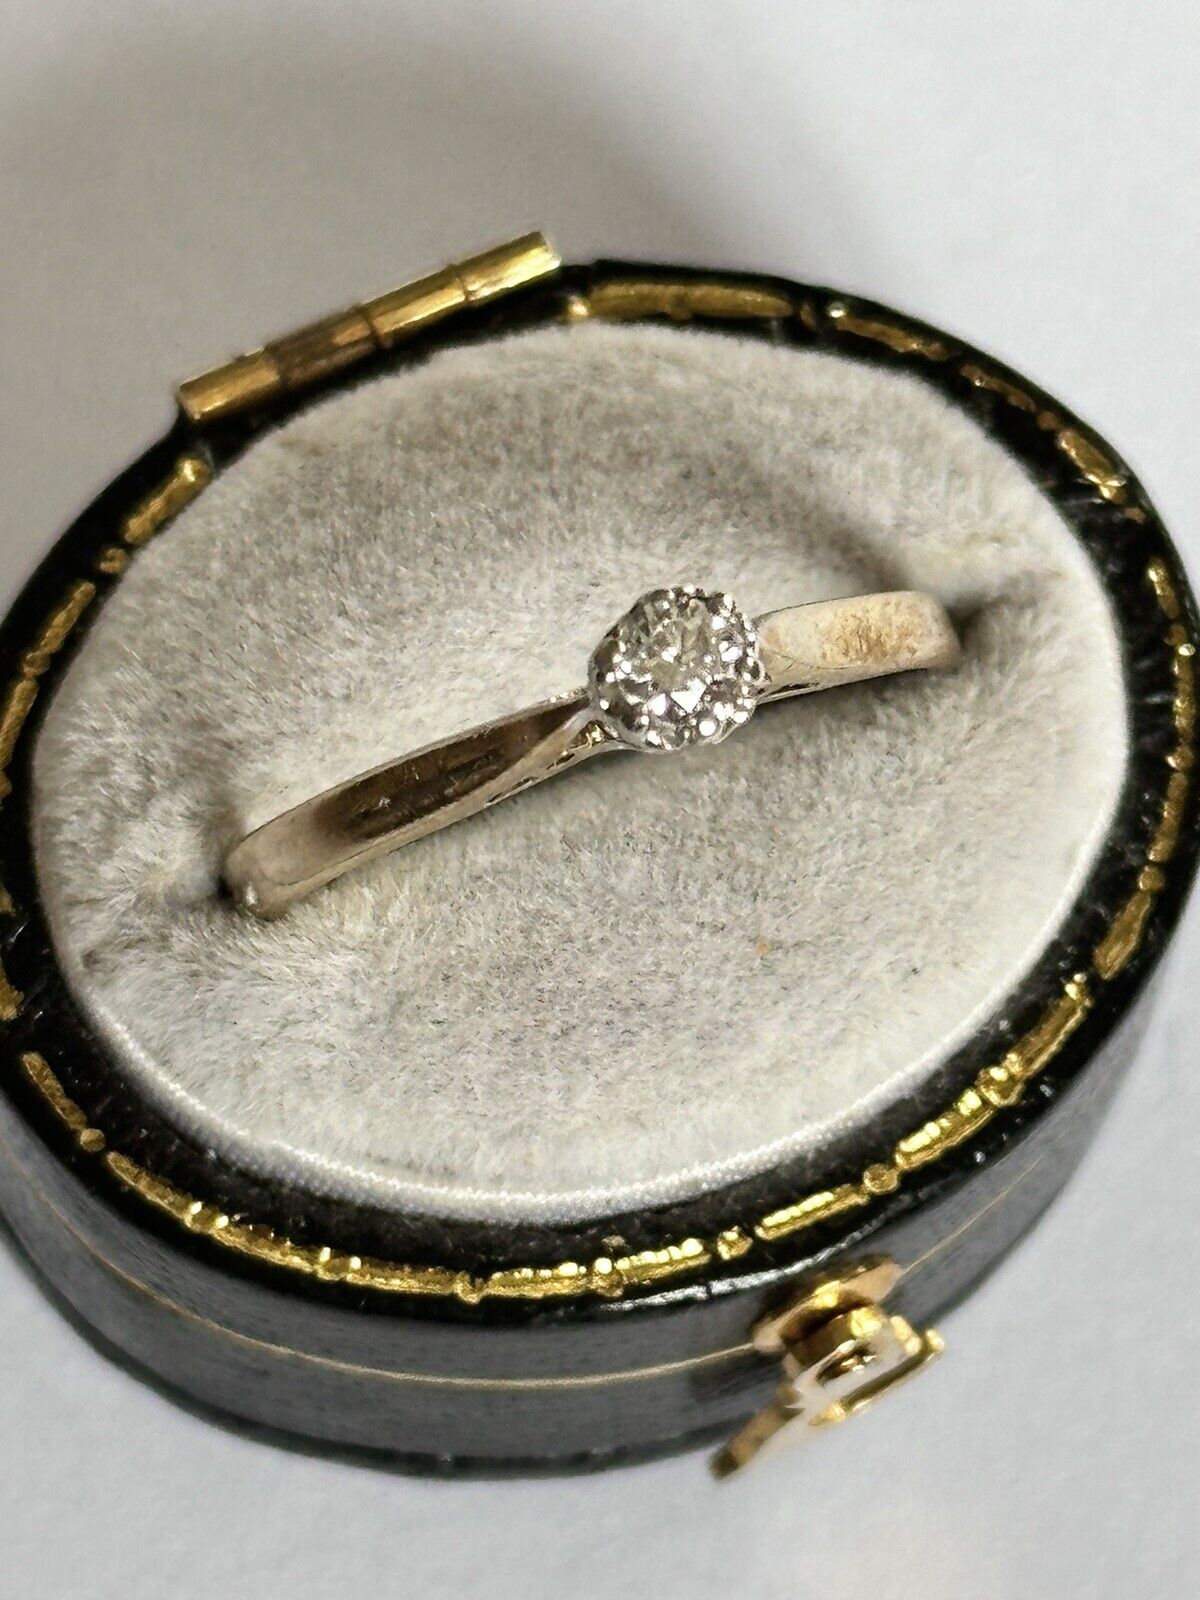 Vintage 9ct Gold 0.10ct Solitaire Diamond Engagement Ring